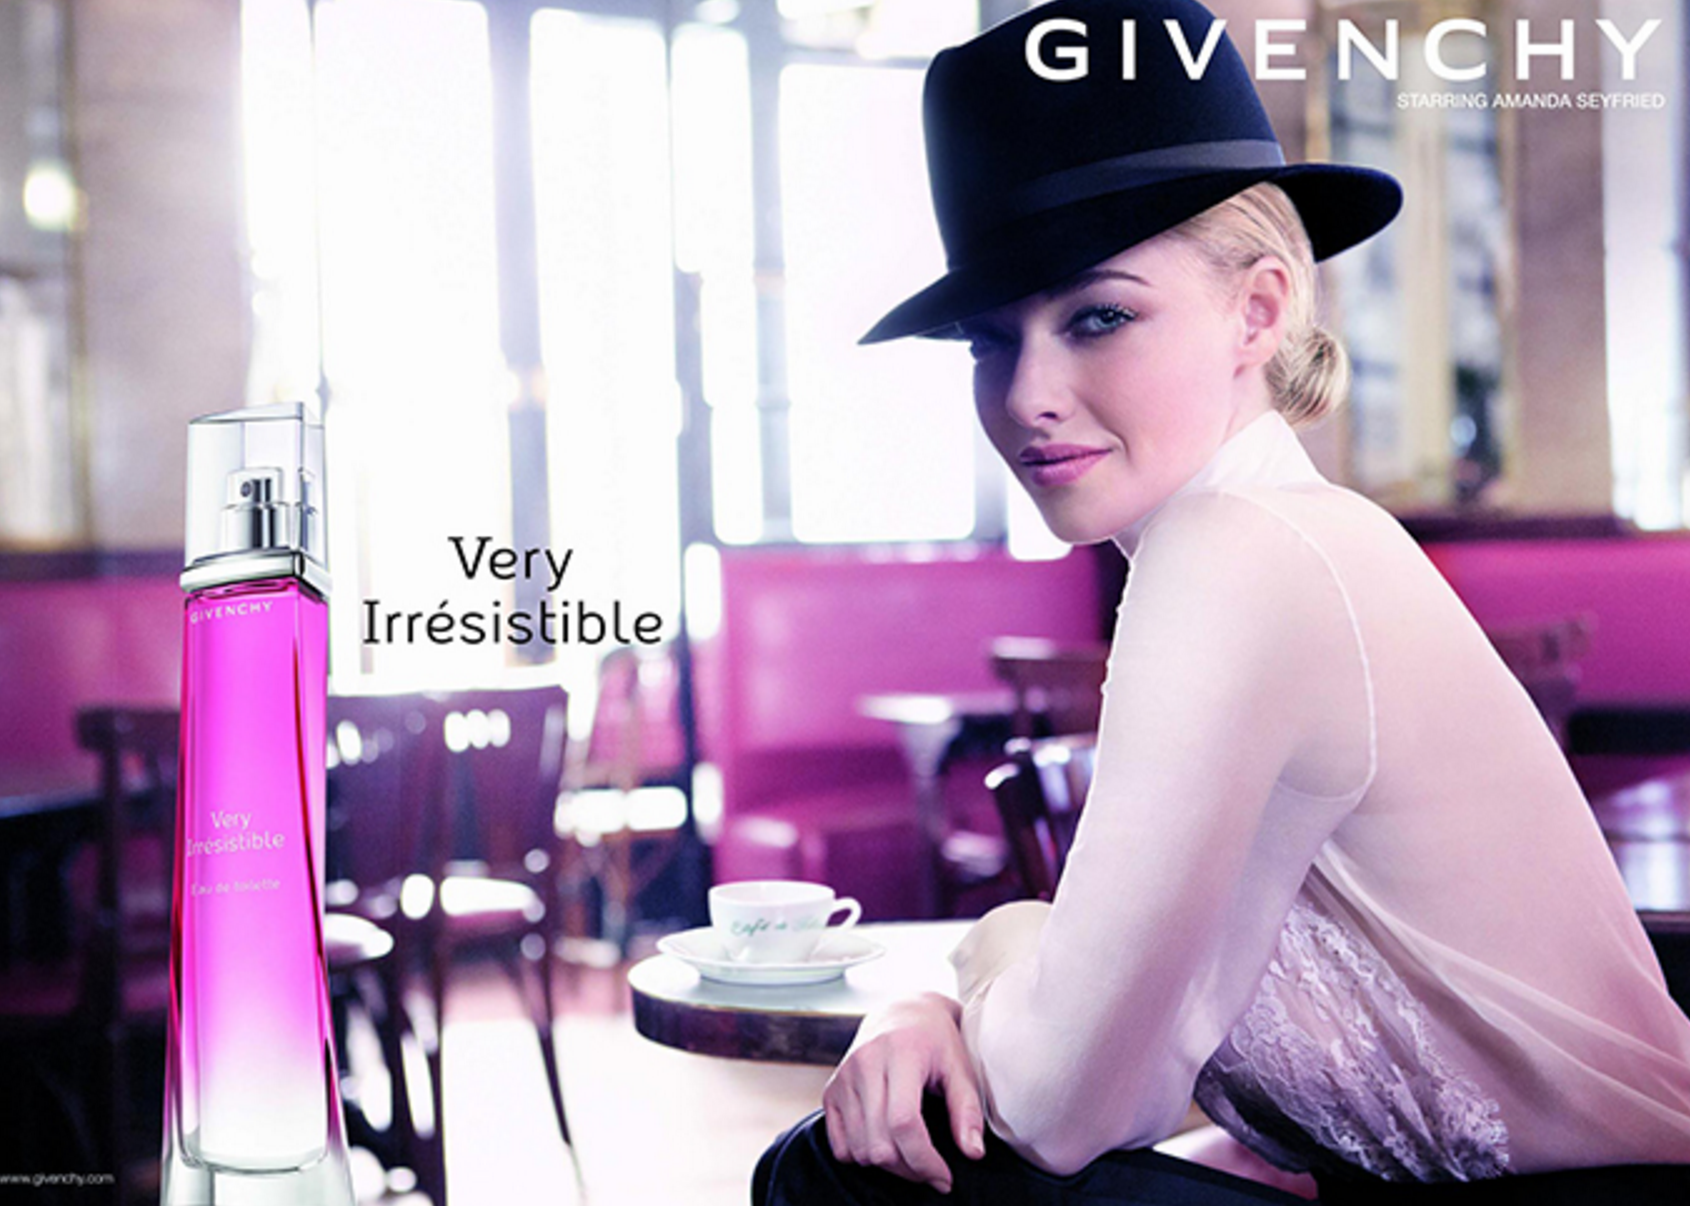 8. Givenchy | Business Insider India